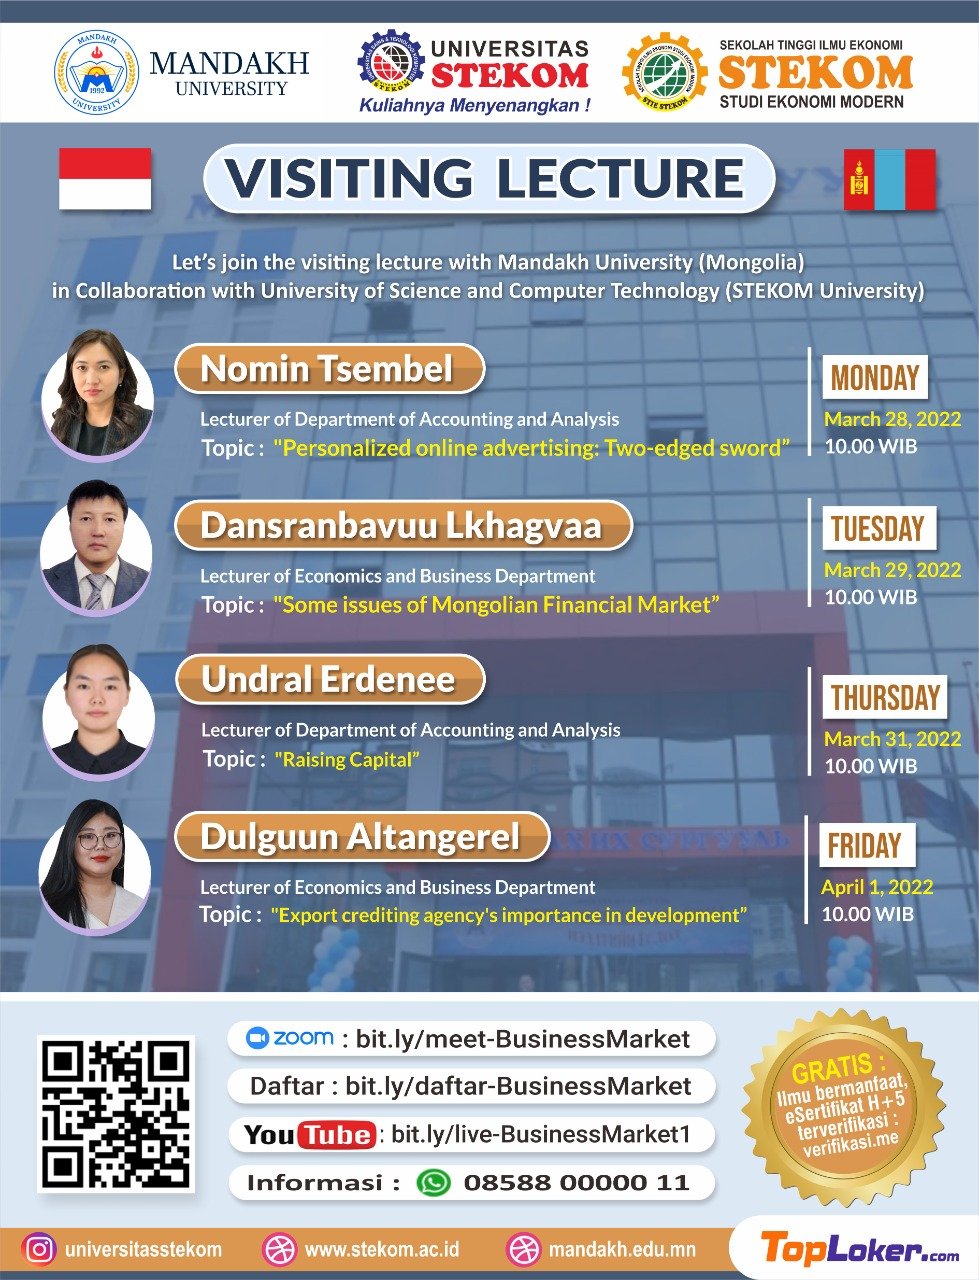 Mandakh University lecturers successfully participate in the “Visiting Lecturers” event hosted by University of Science & Computer Technology (Stekom), Indonesia and Smart Indonesian Teacherpreneur Association (PTIC)